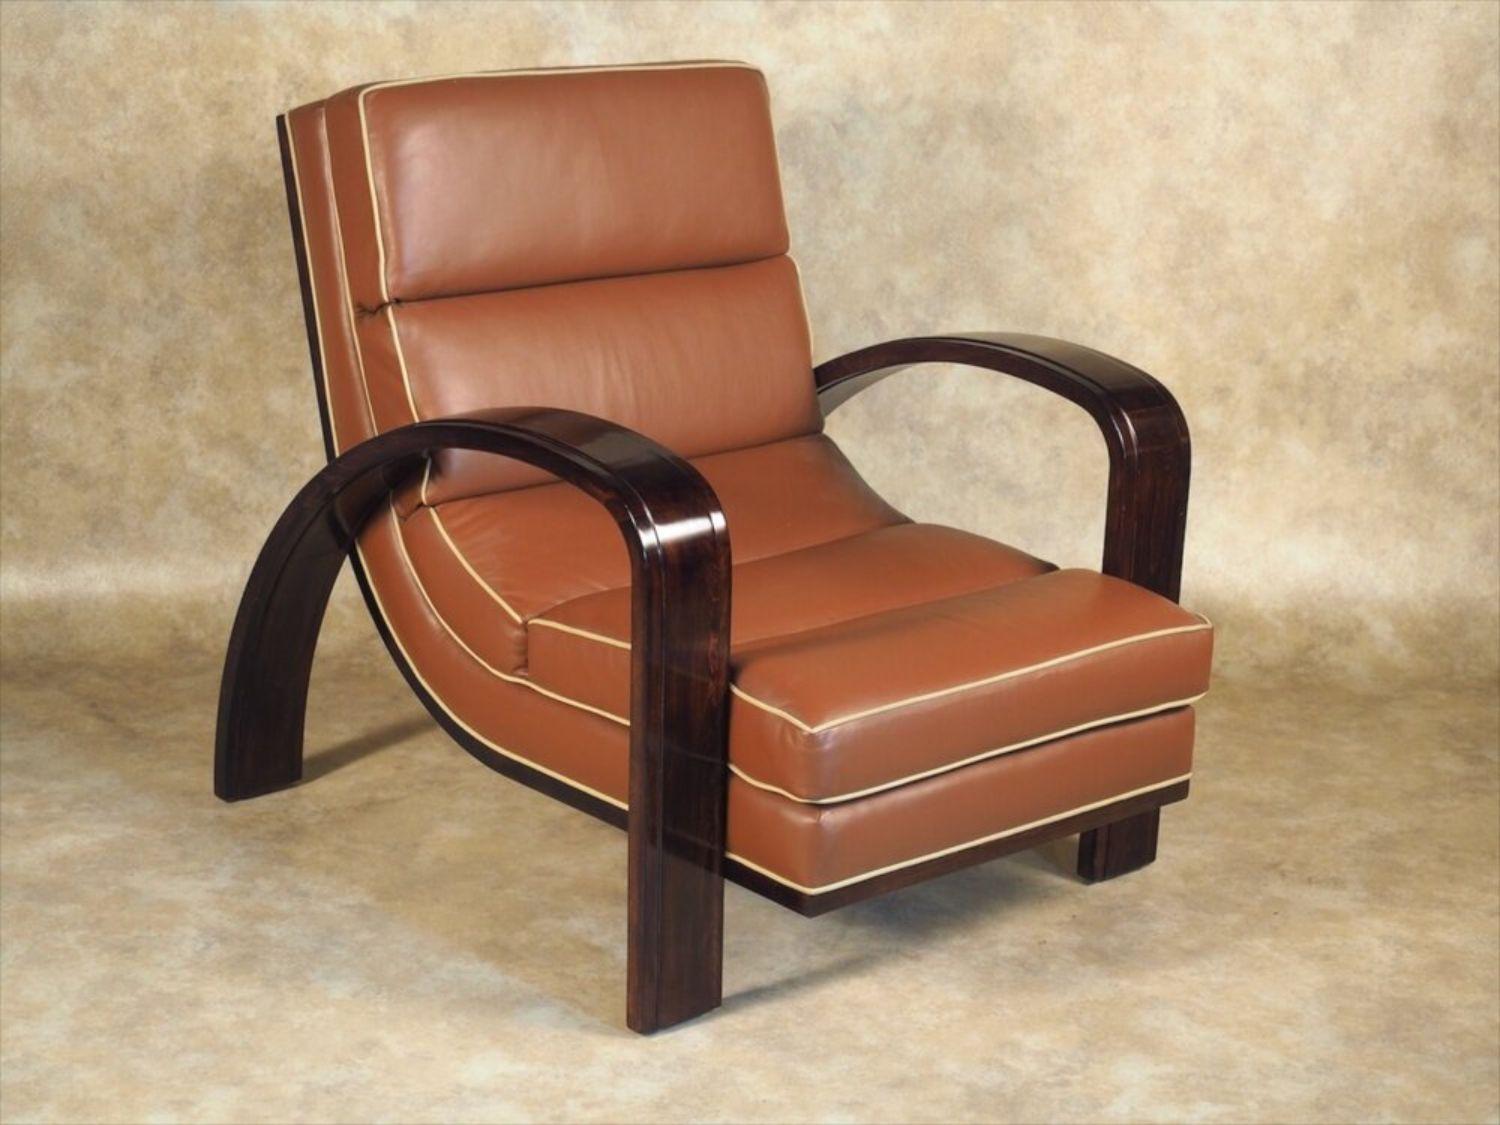 French Modernist armchair. Model exhibited at the 1929 Salon des Artistes Decorateurs, Paris, France. Pictured in period documentation. Beech frame and leather upholstering.